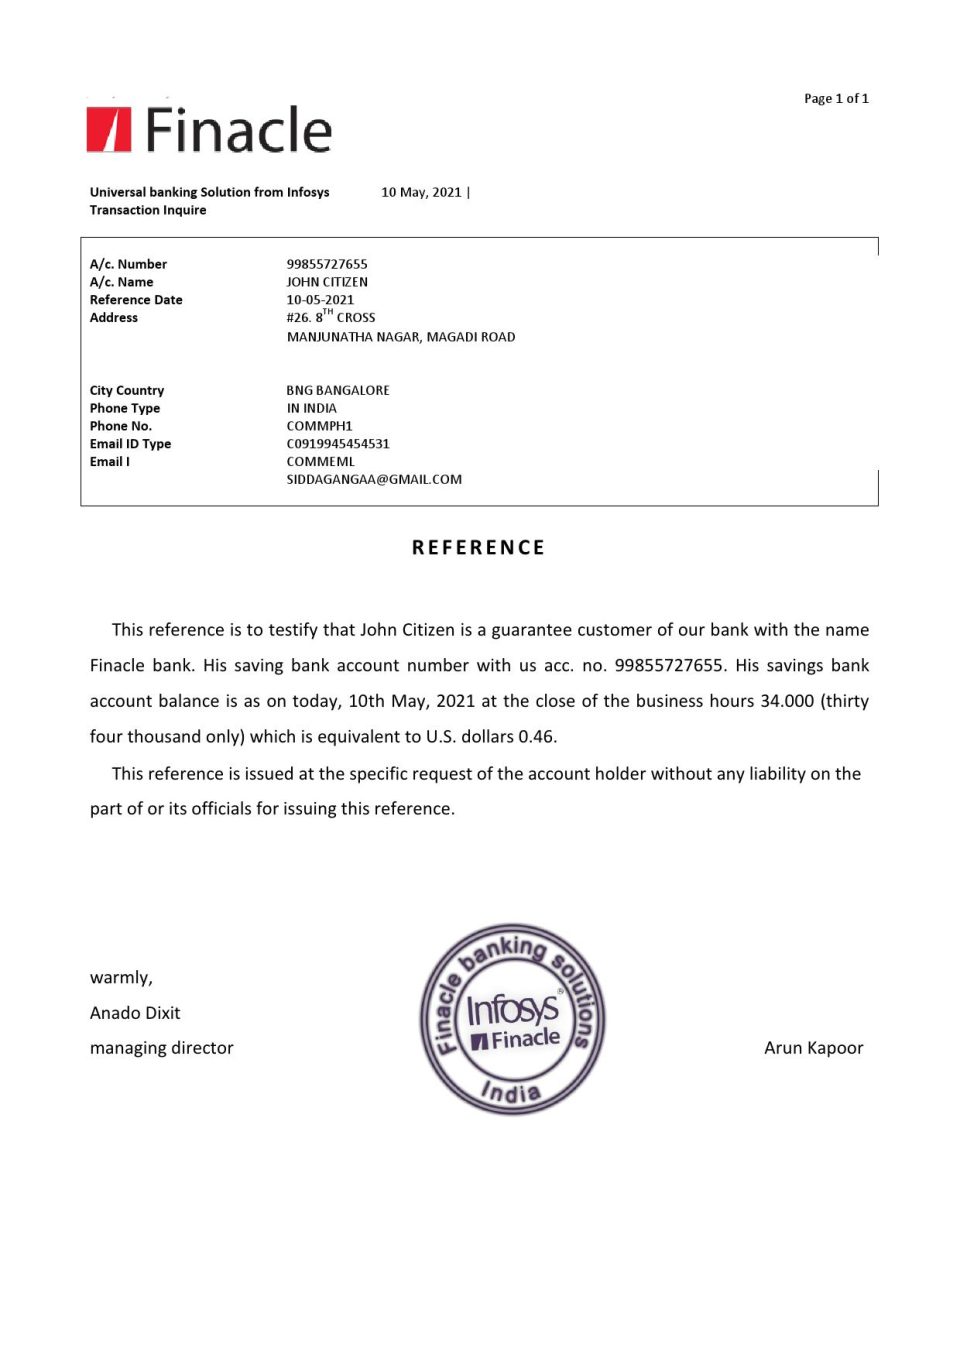 Download India Finacle Bank Reference Letter Templates | Editable Word